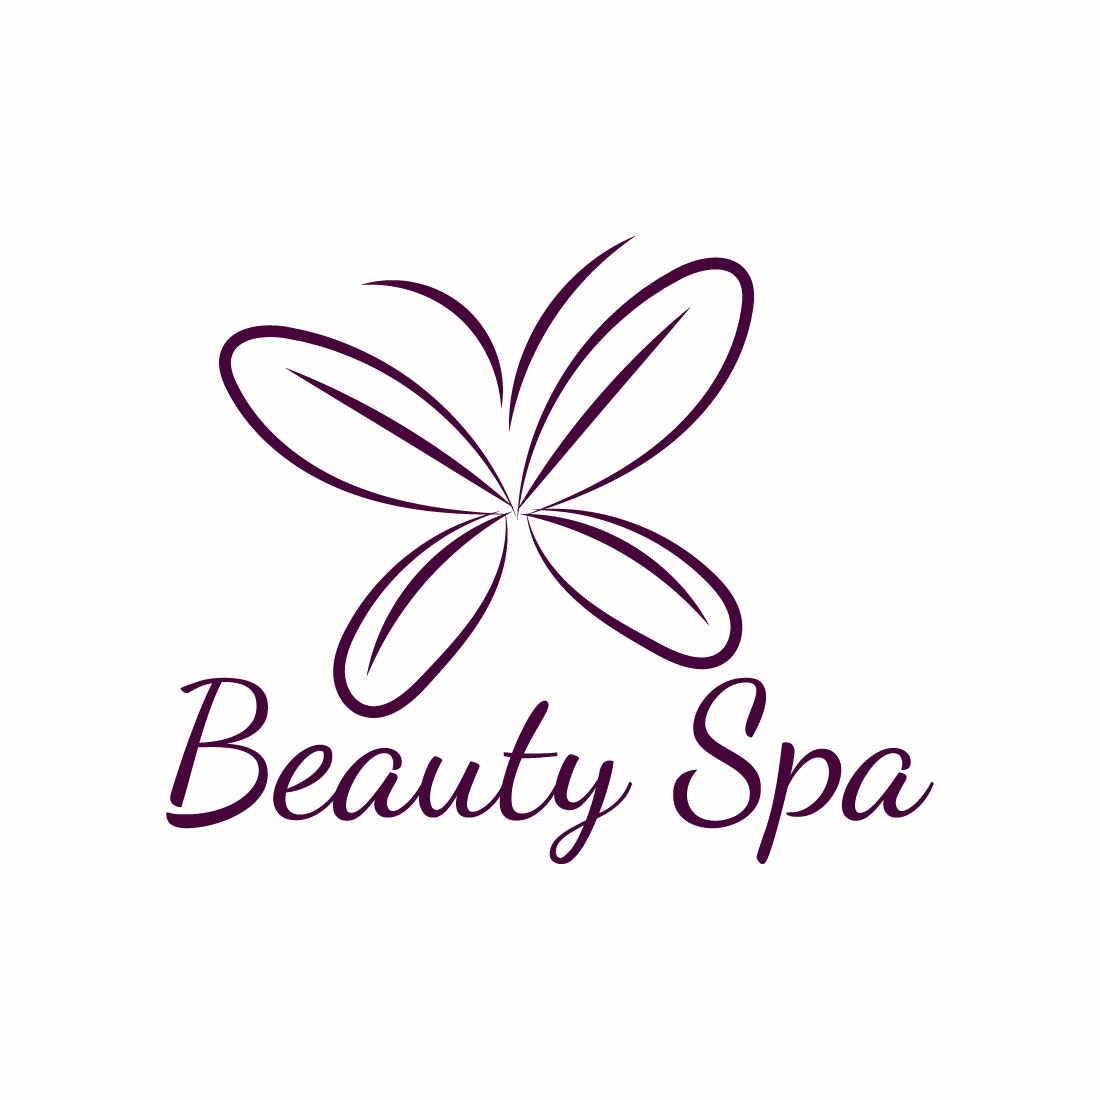 Free Healthy skin care logo cover image.